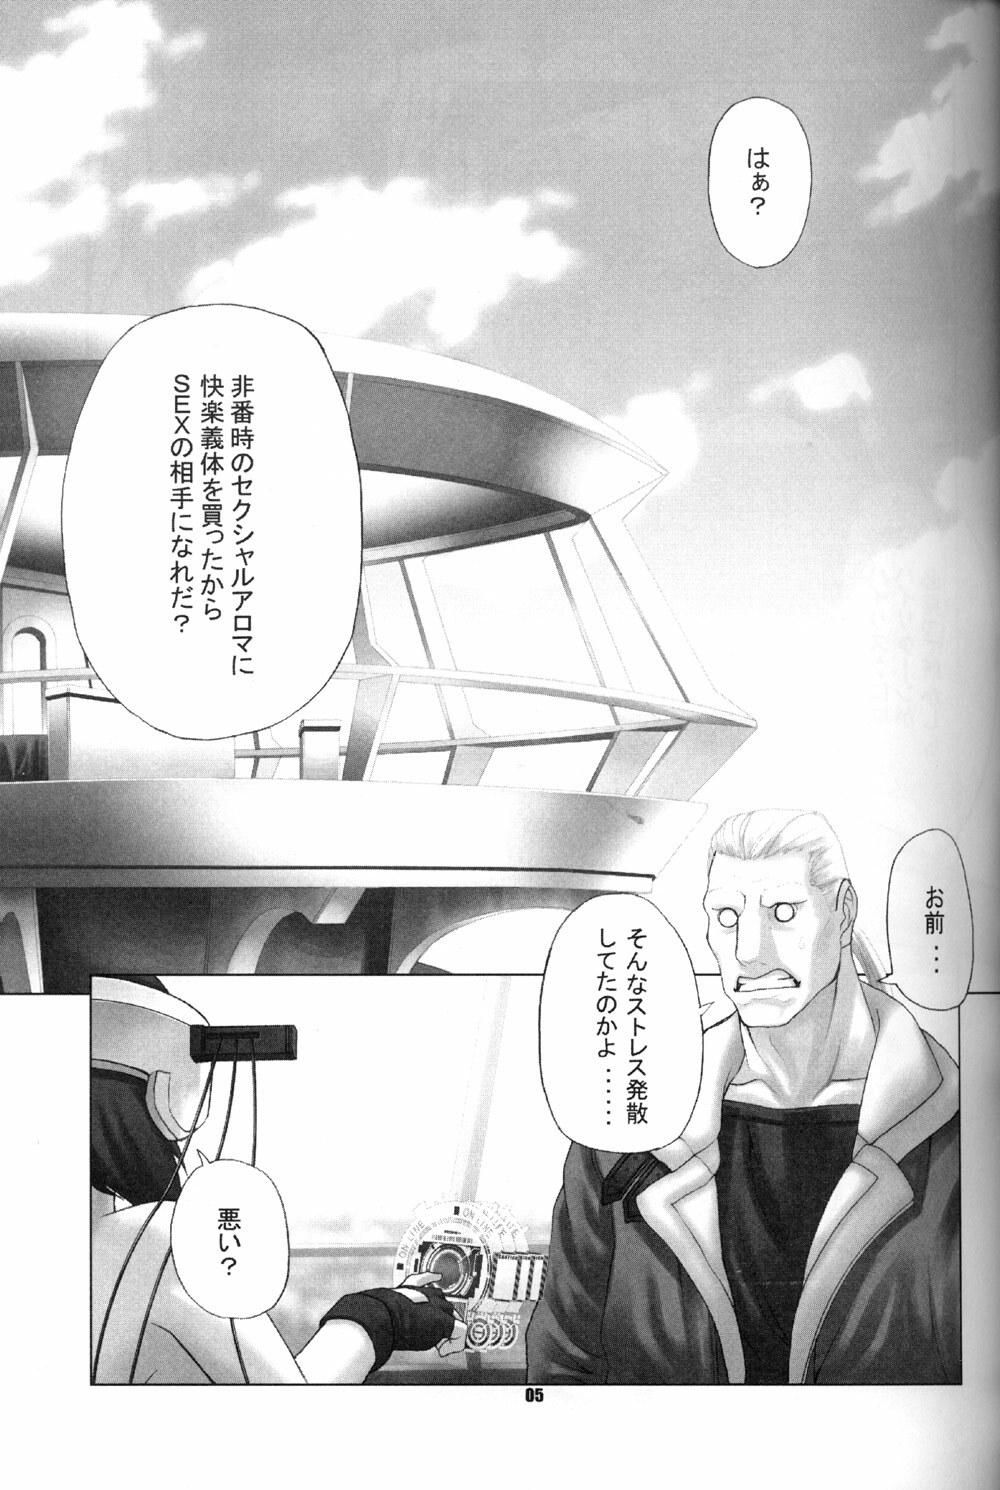 (C66) [Runners High (Chiba Toshirou)] CELLULOID - ACME (Ghost in the Shell) page 5 full